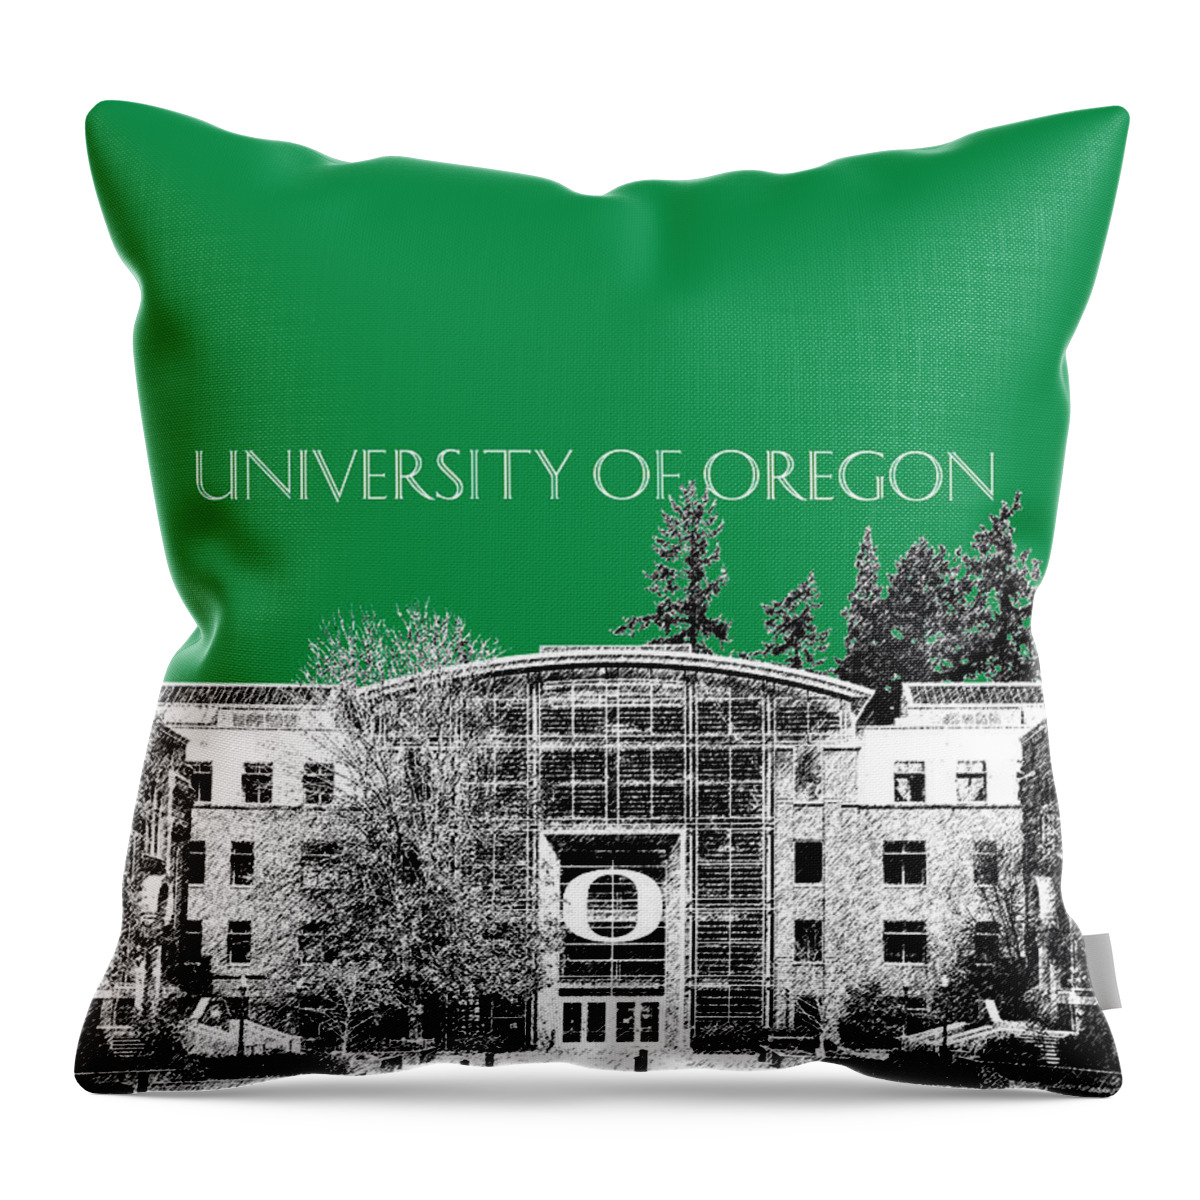 University Throw Pillow featuring the digital art University of Oregon - Forest Green by DB Artist